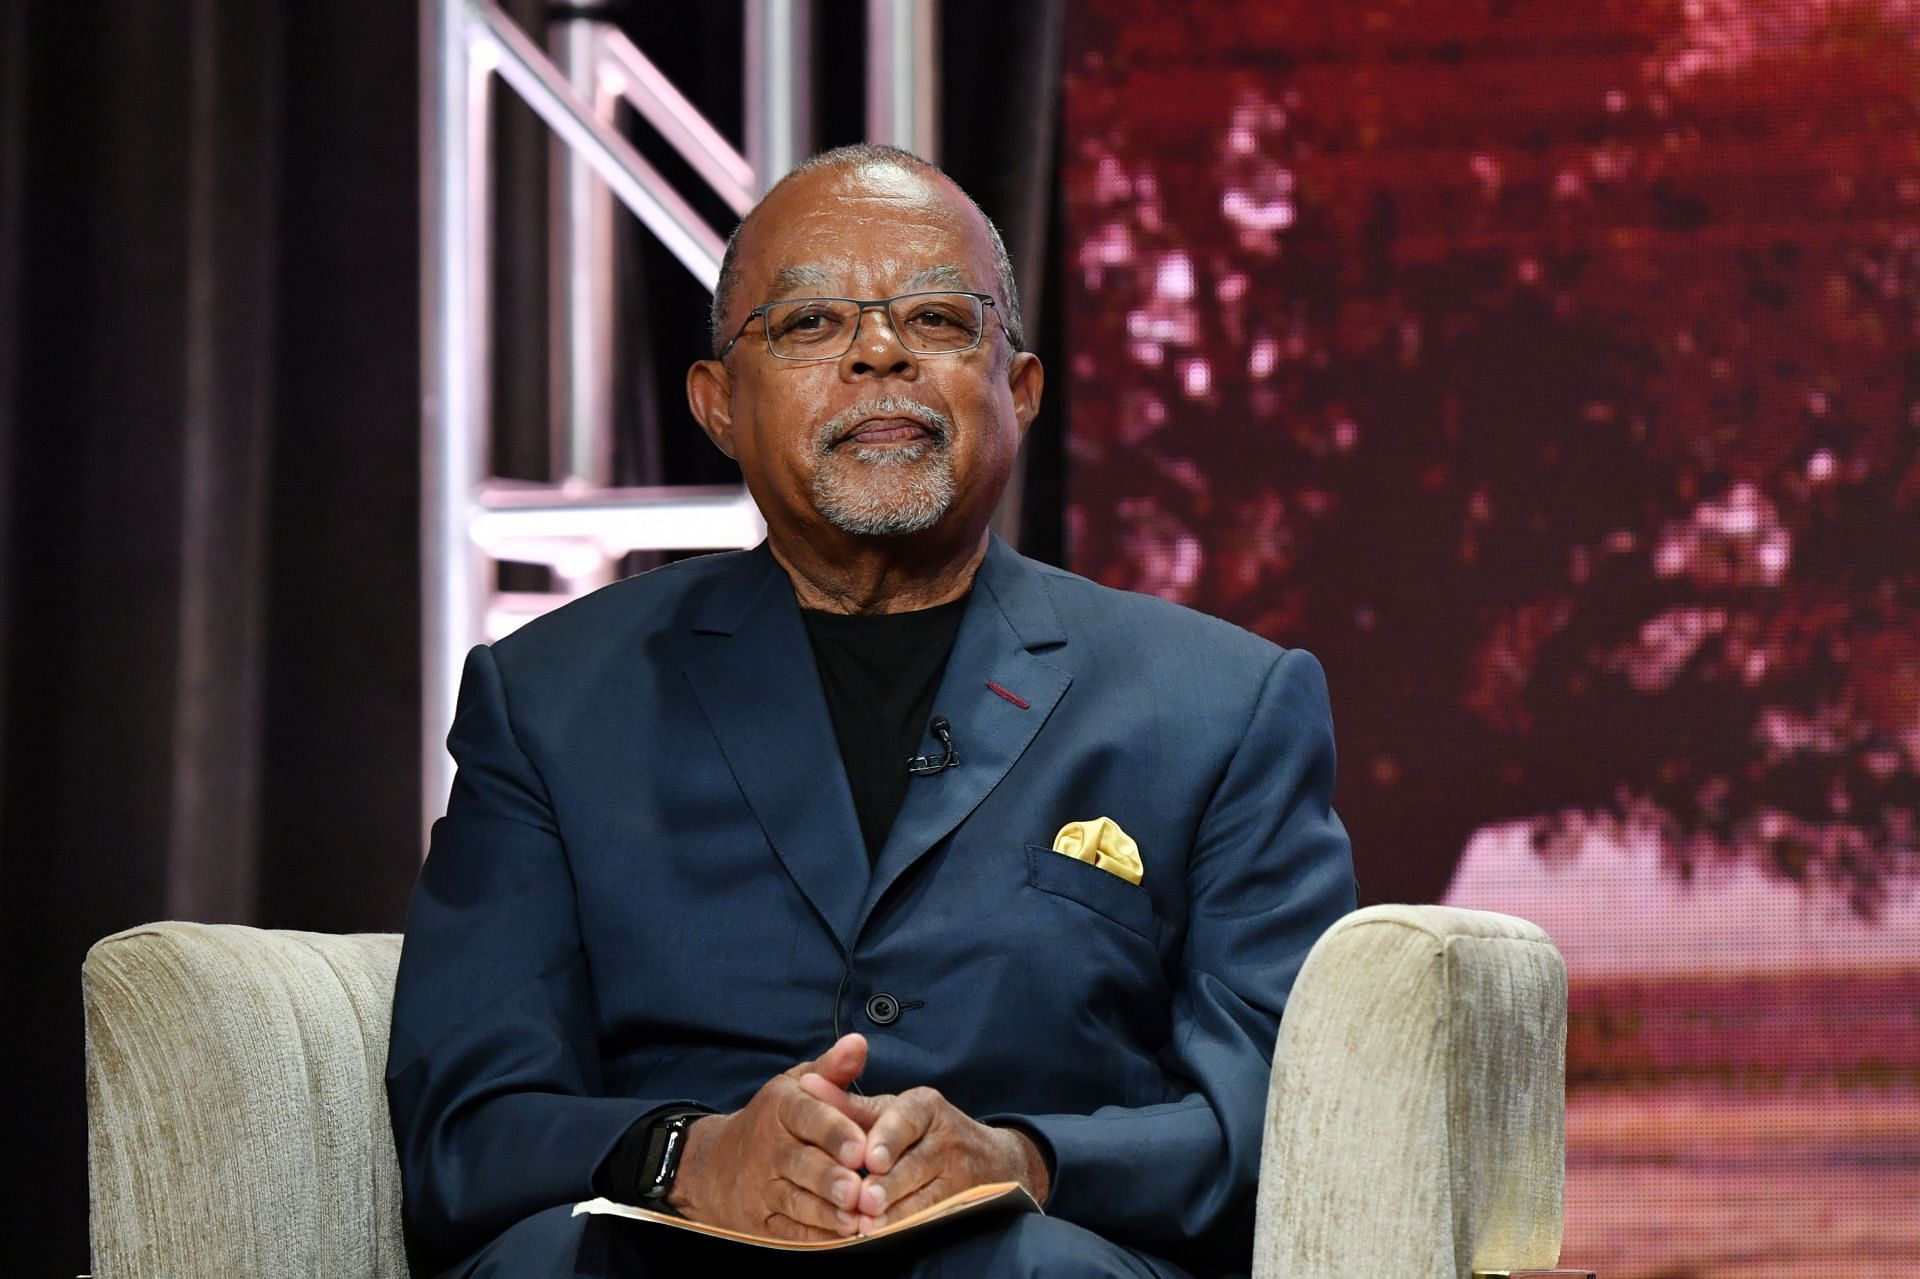 Henry Louis Gates Jr. at the 2019 Summer TCA Press Tour - Day 7 (Photo by Amy Sussman/Getty Images)